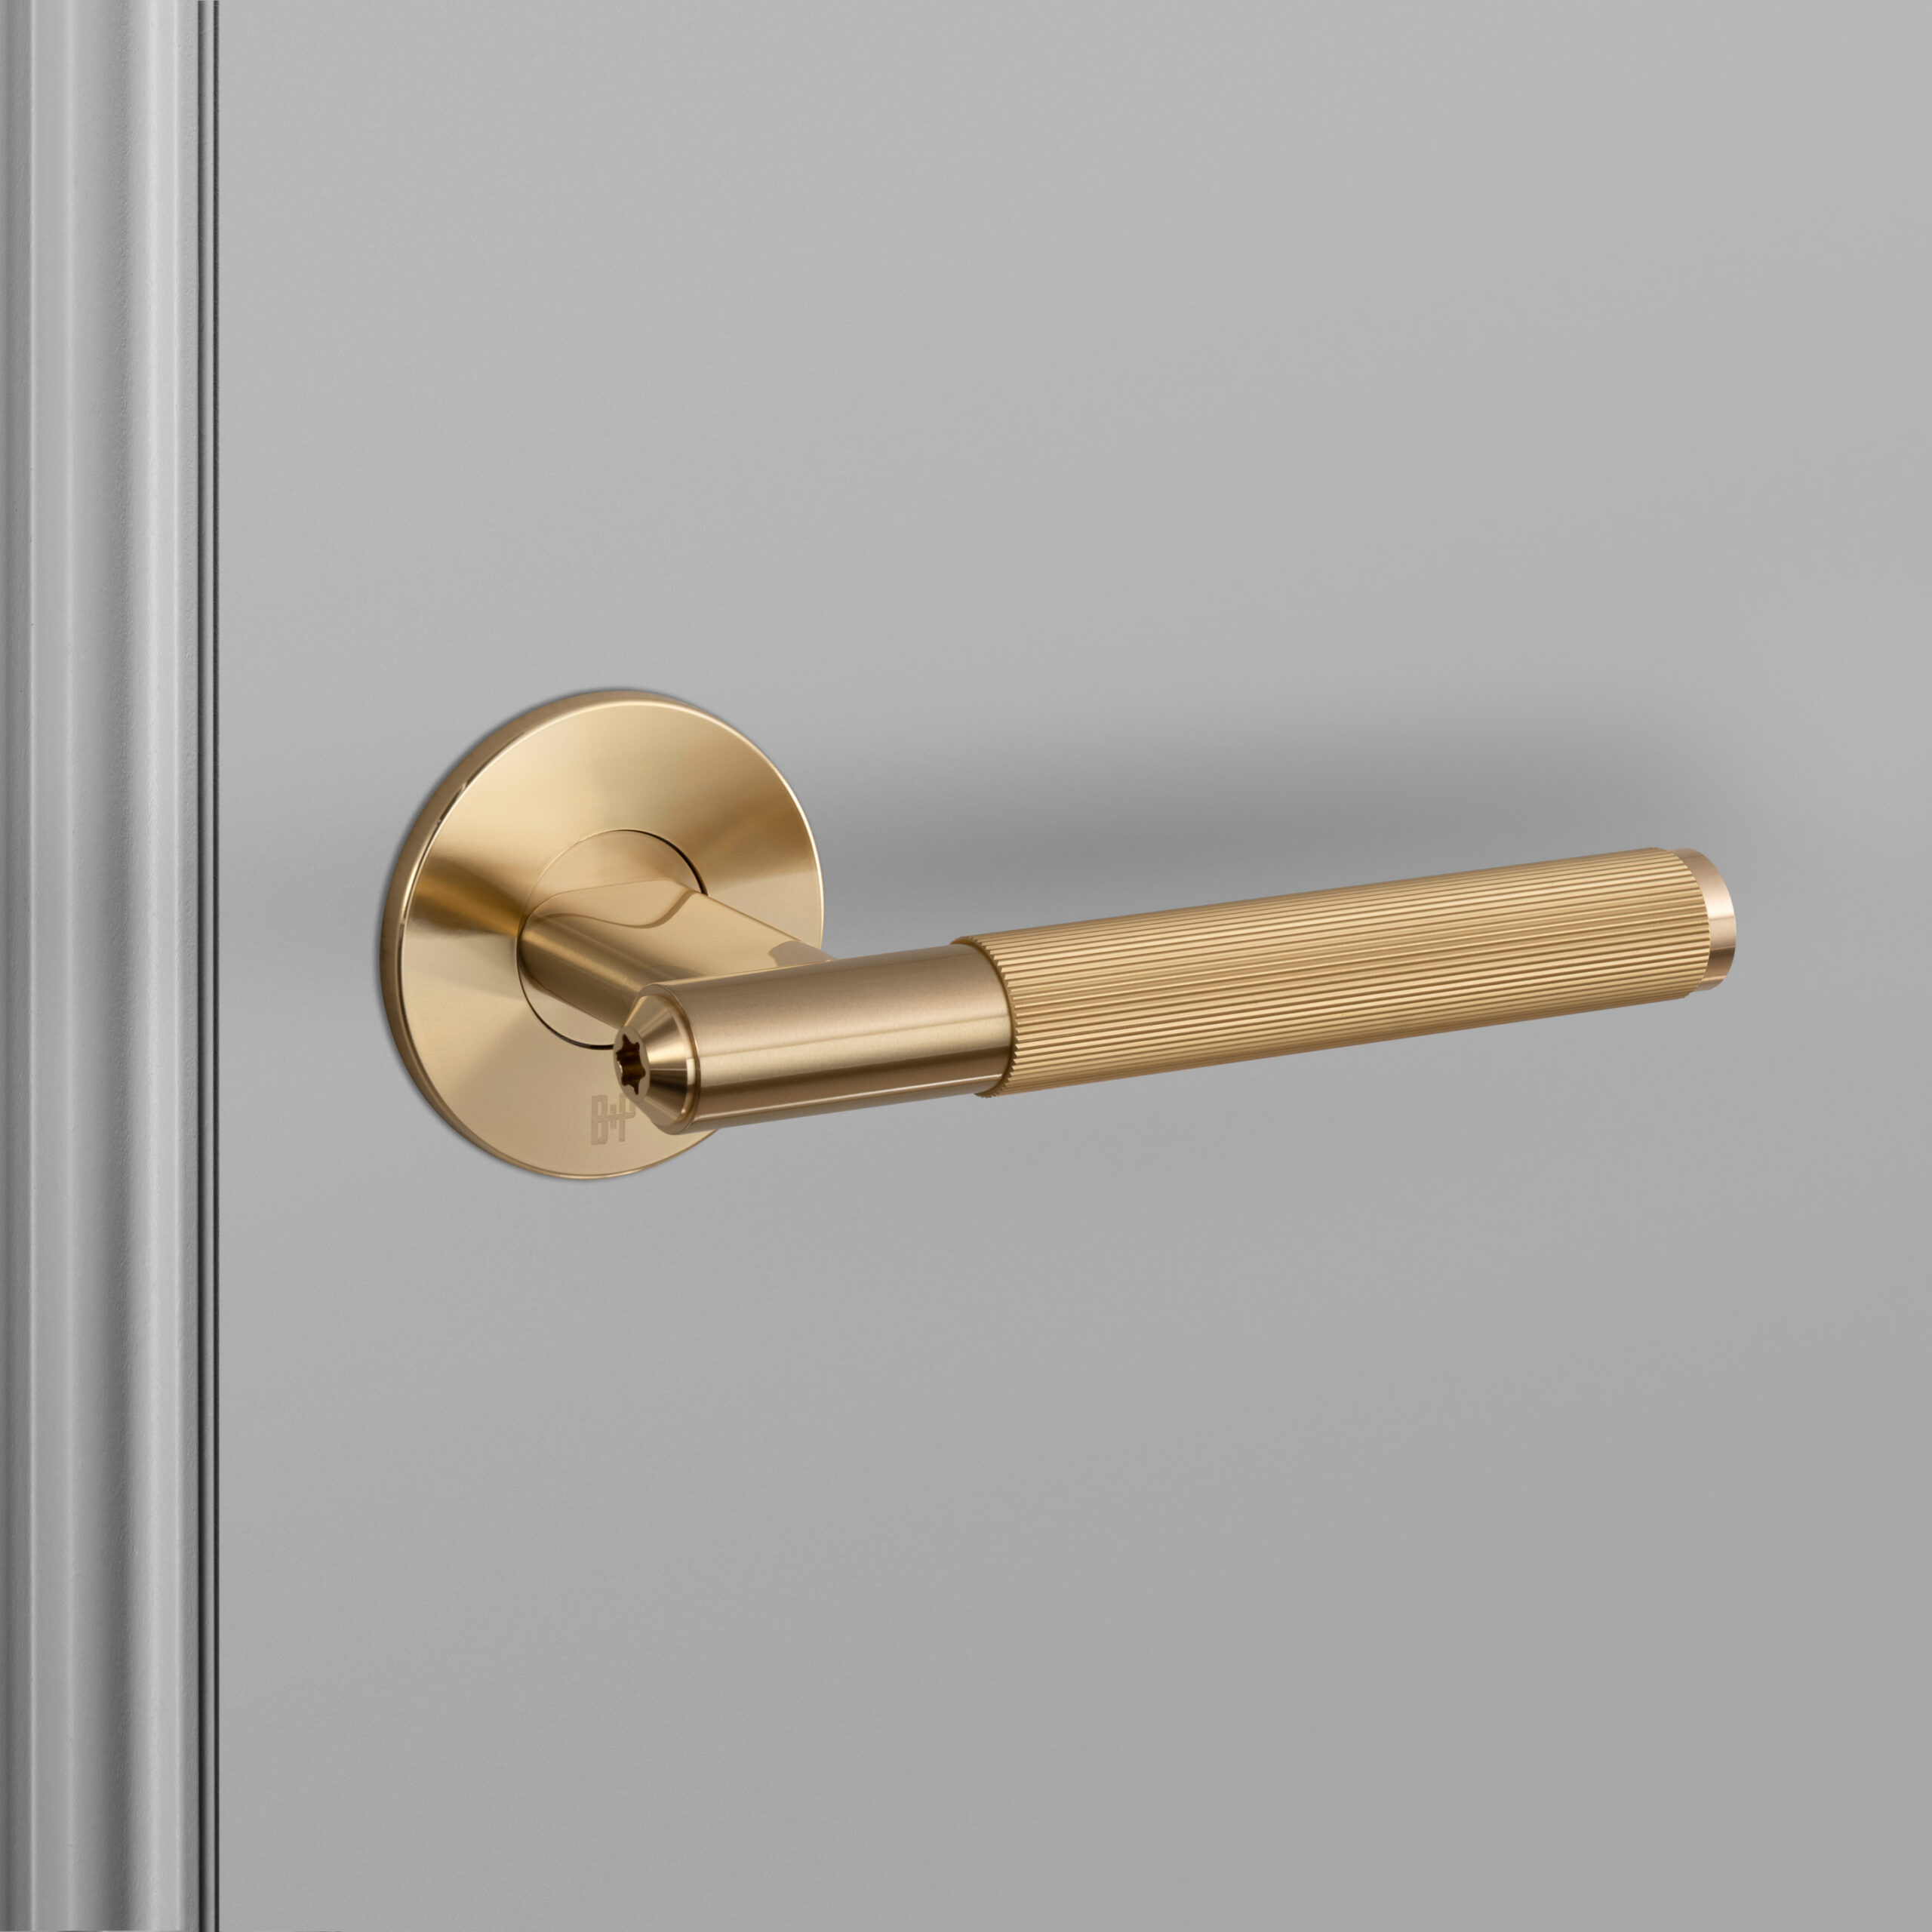 FIXED DOOR HANDLE / SINGLE-SIDED / LINEAR / BRASS - Buster + Punch